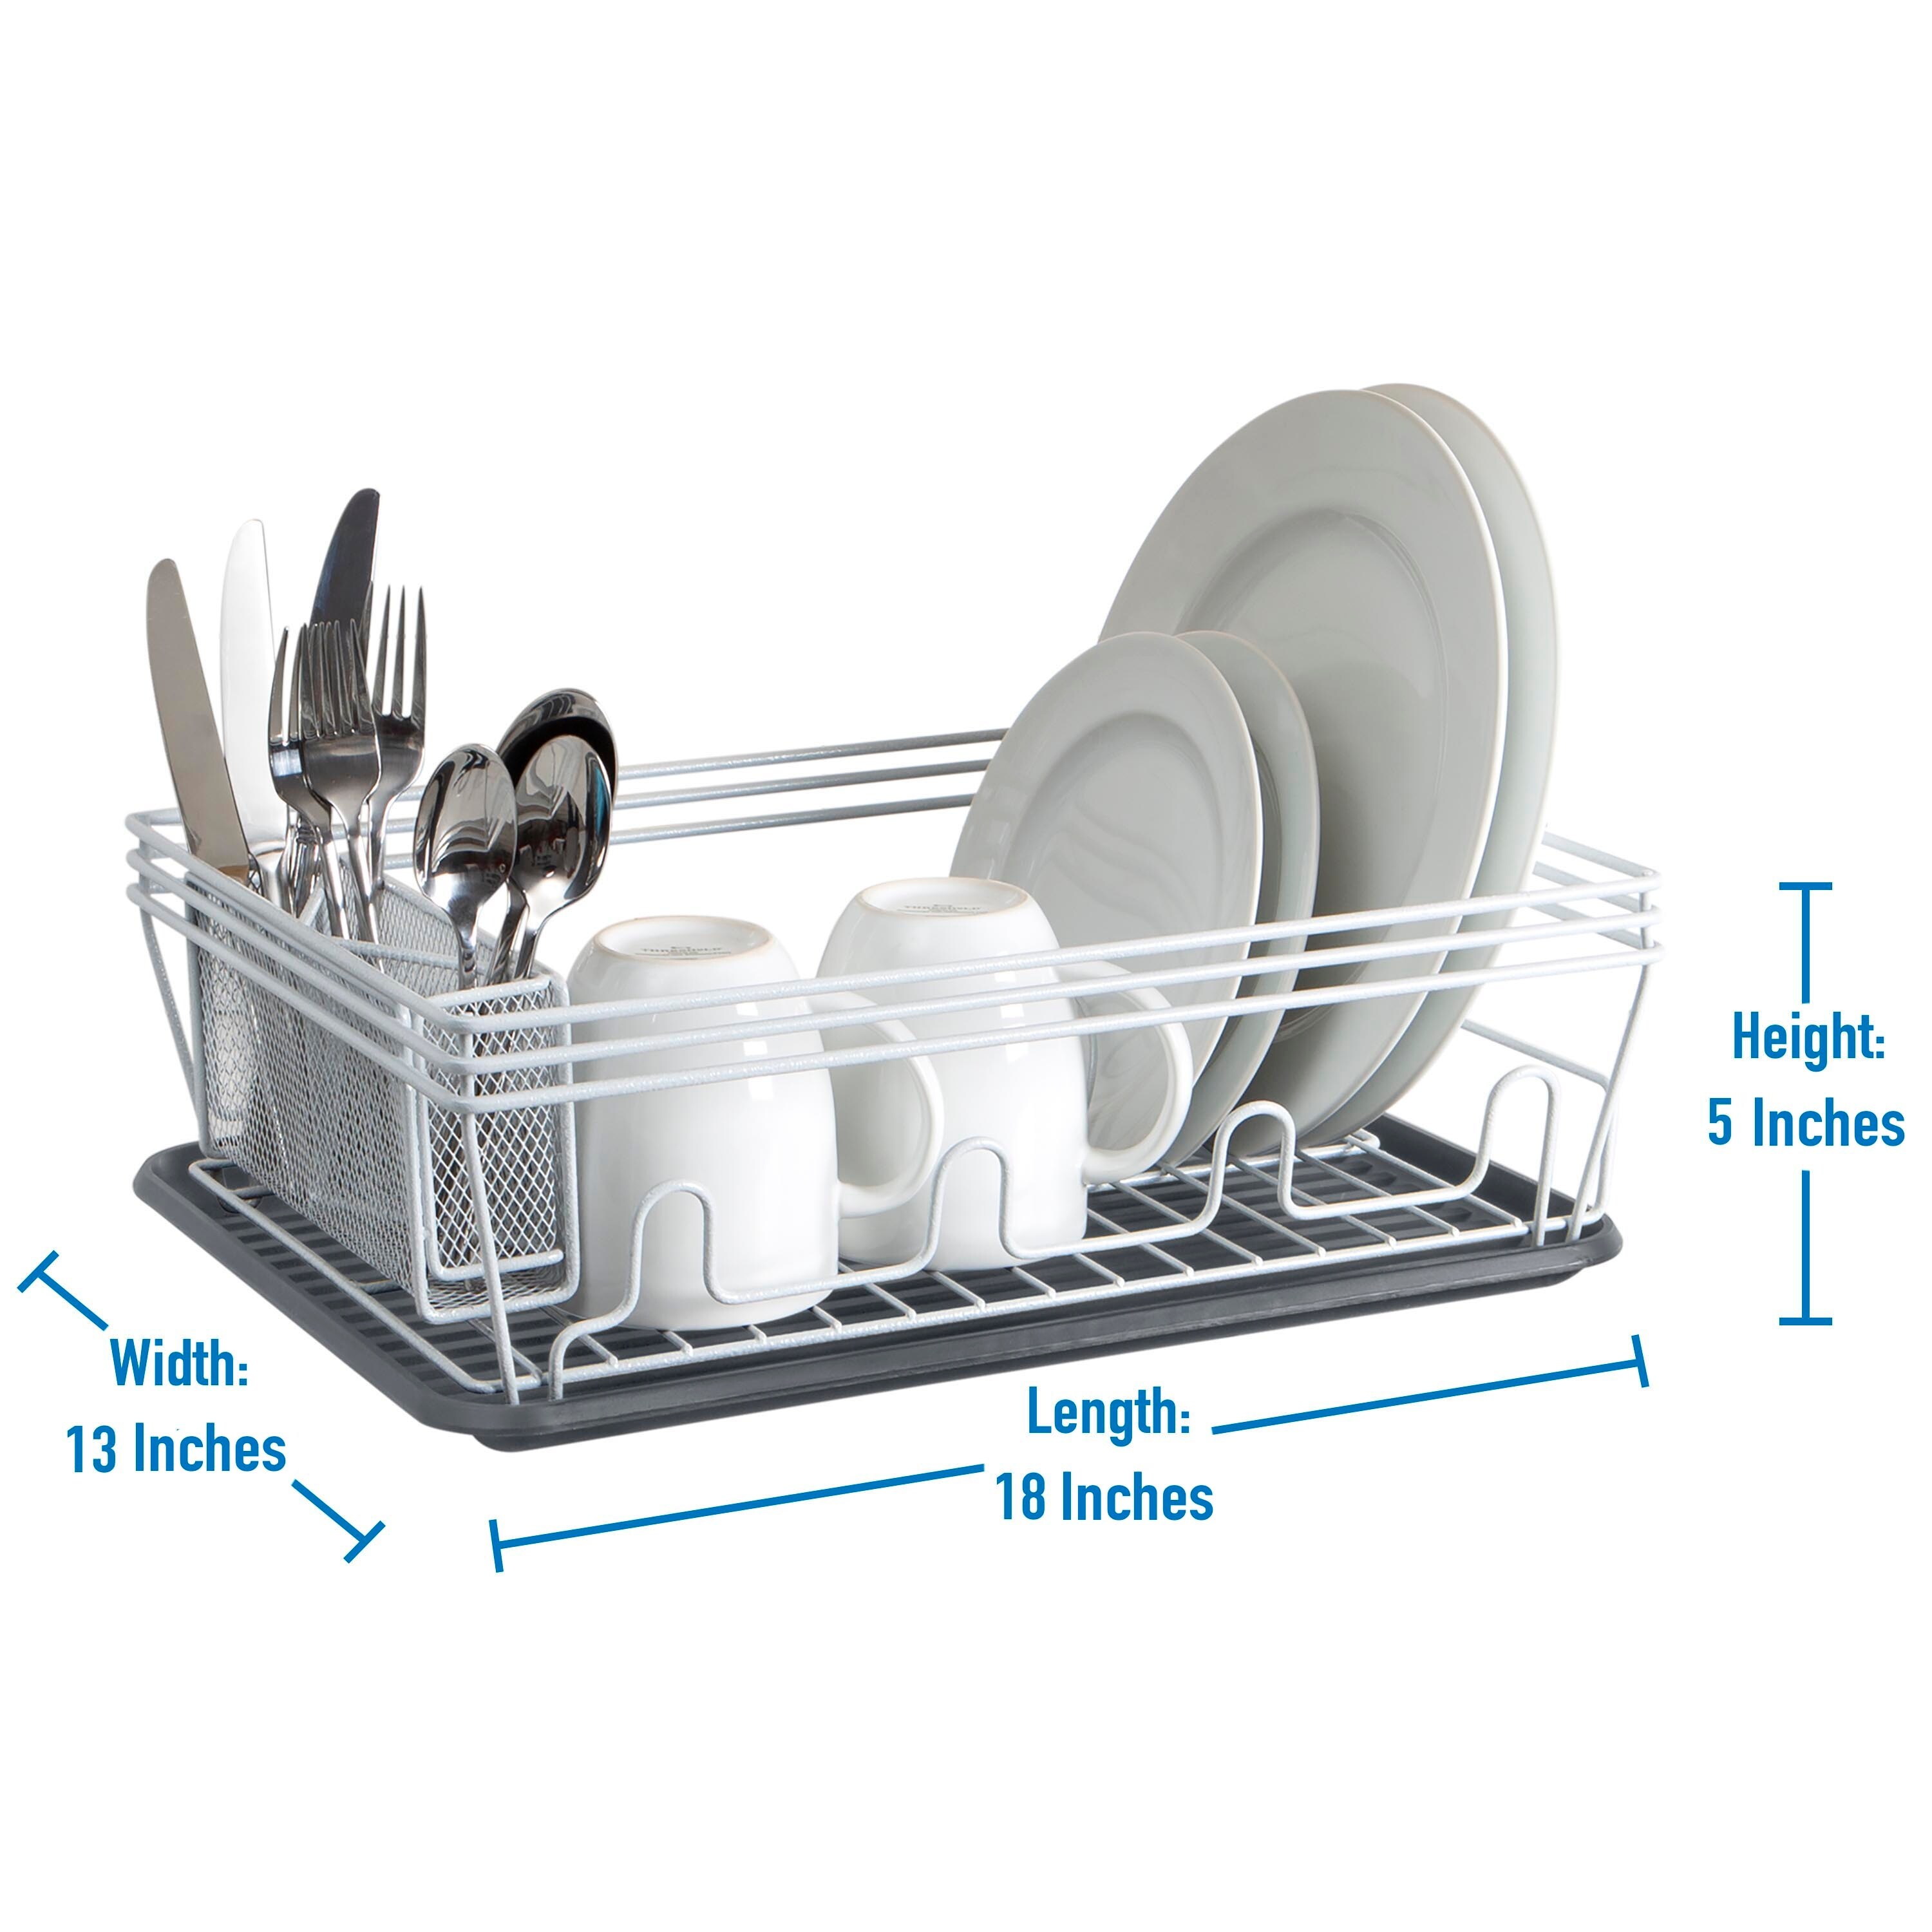 https://ak1.ostkcdn.com/images/products/is/images/direct/15e22ca3549c5756a21fbc64885553007c662c40/Laura-Ashley-Speckled-Dish-Rack-Set-in-Grey.jpg